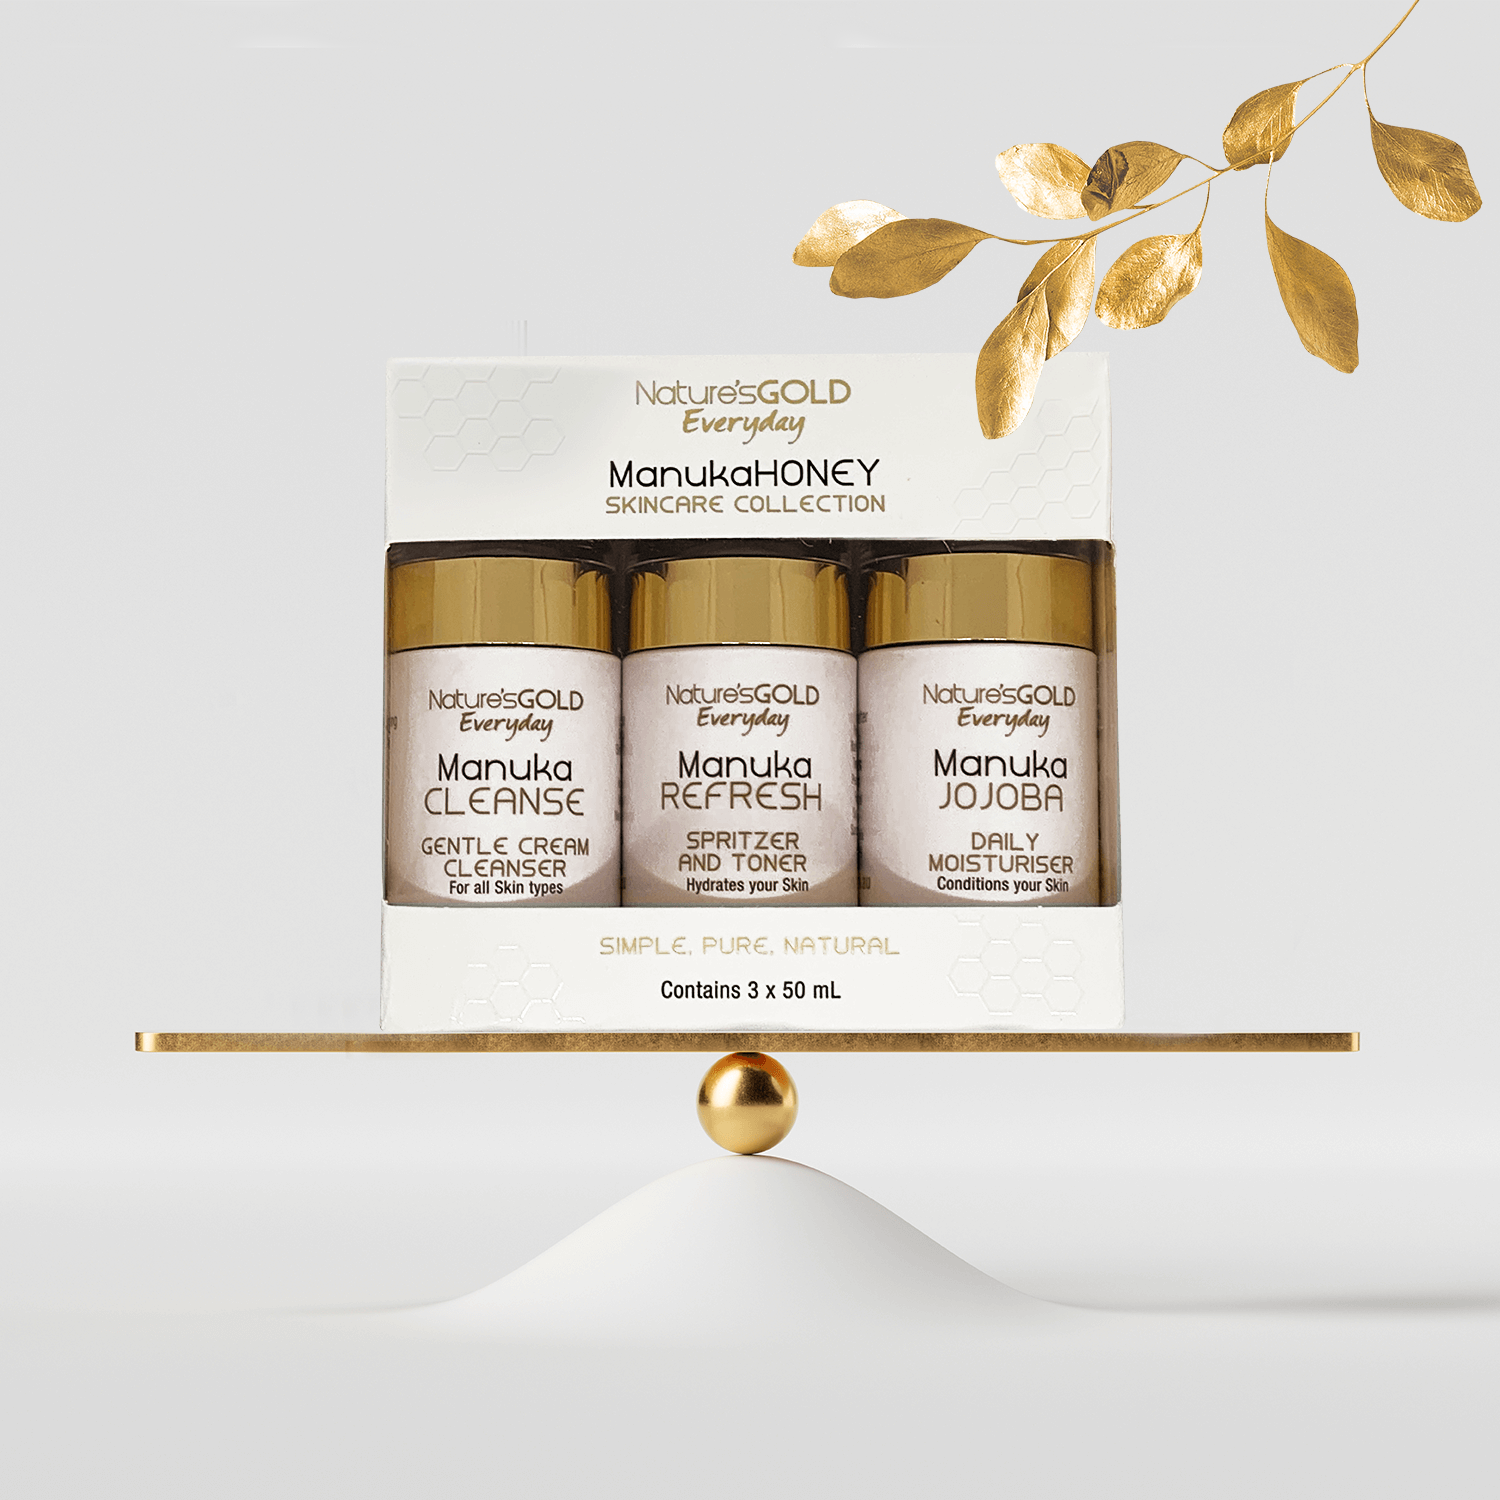 Nature'sGOLD Everyday Skincare Pack